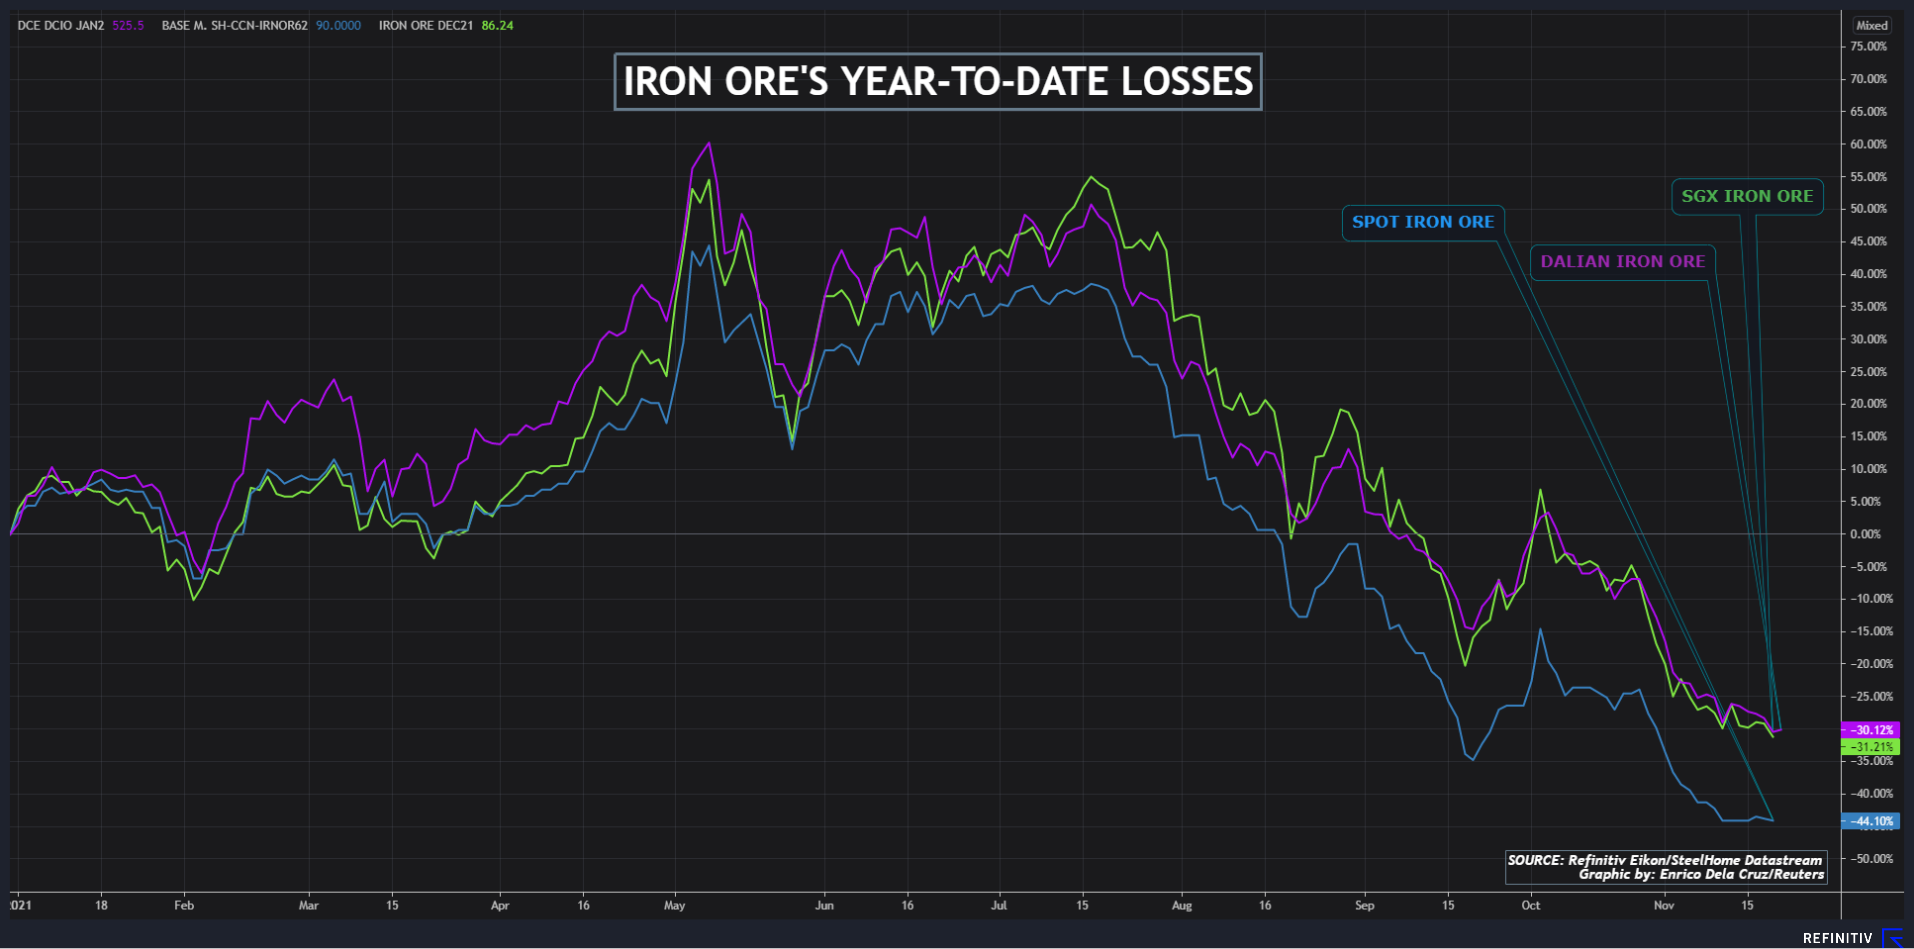 Iron ore's year-to-date losses